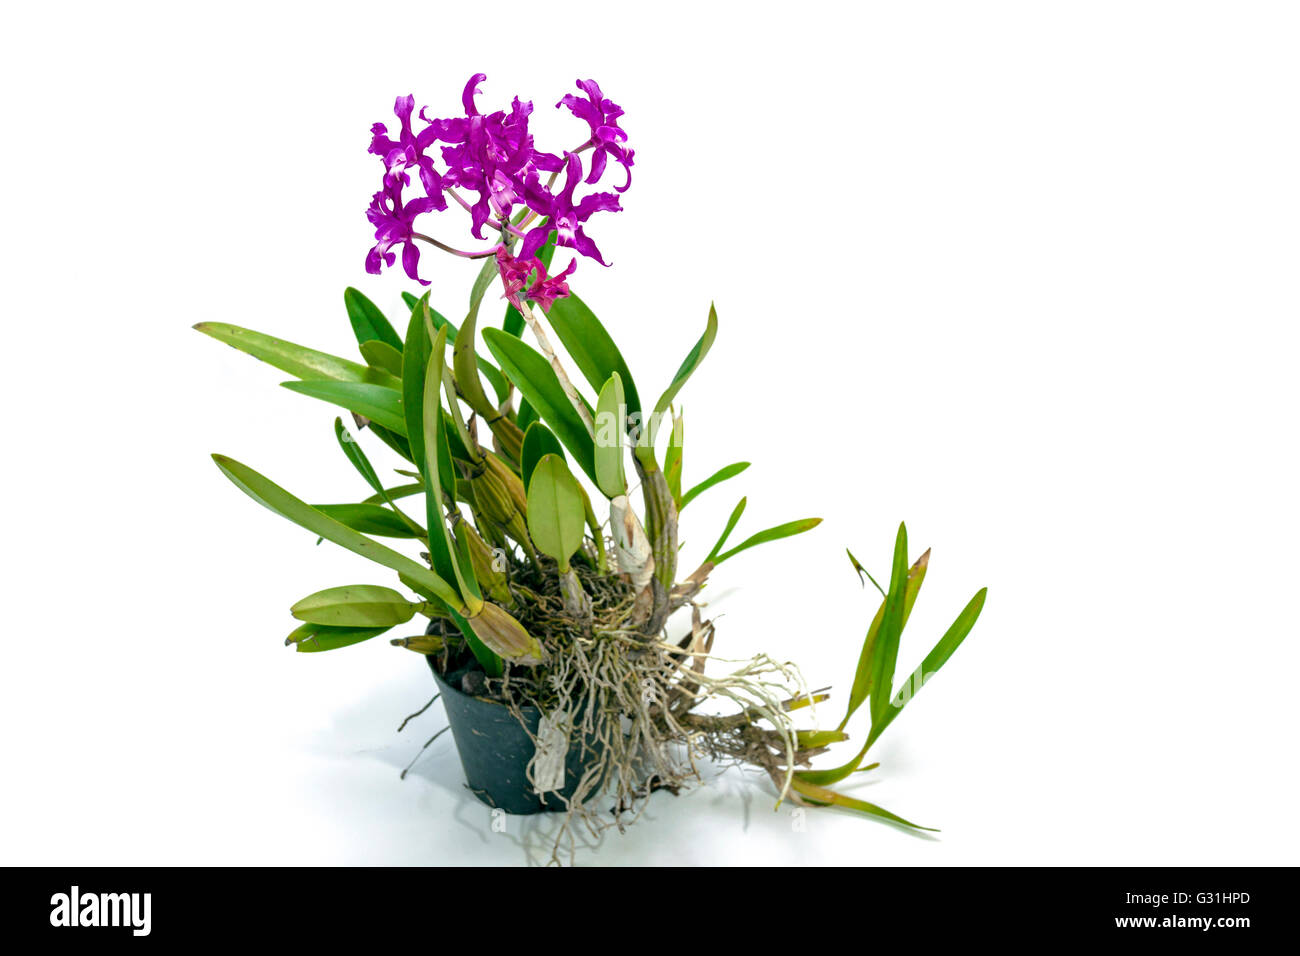 Hybrid orchid plant with stem of purple flowers on white background Stock Photo